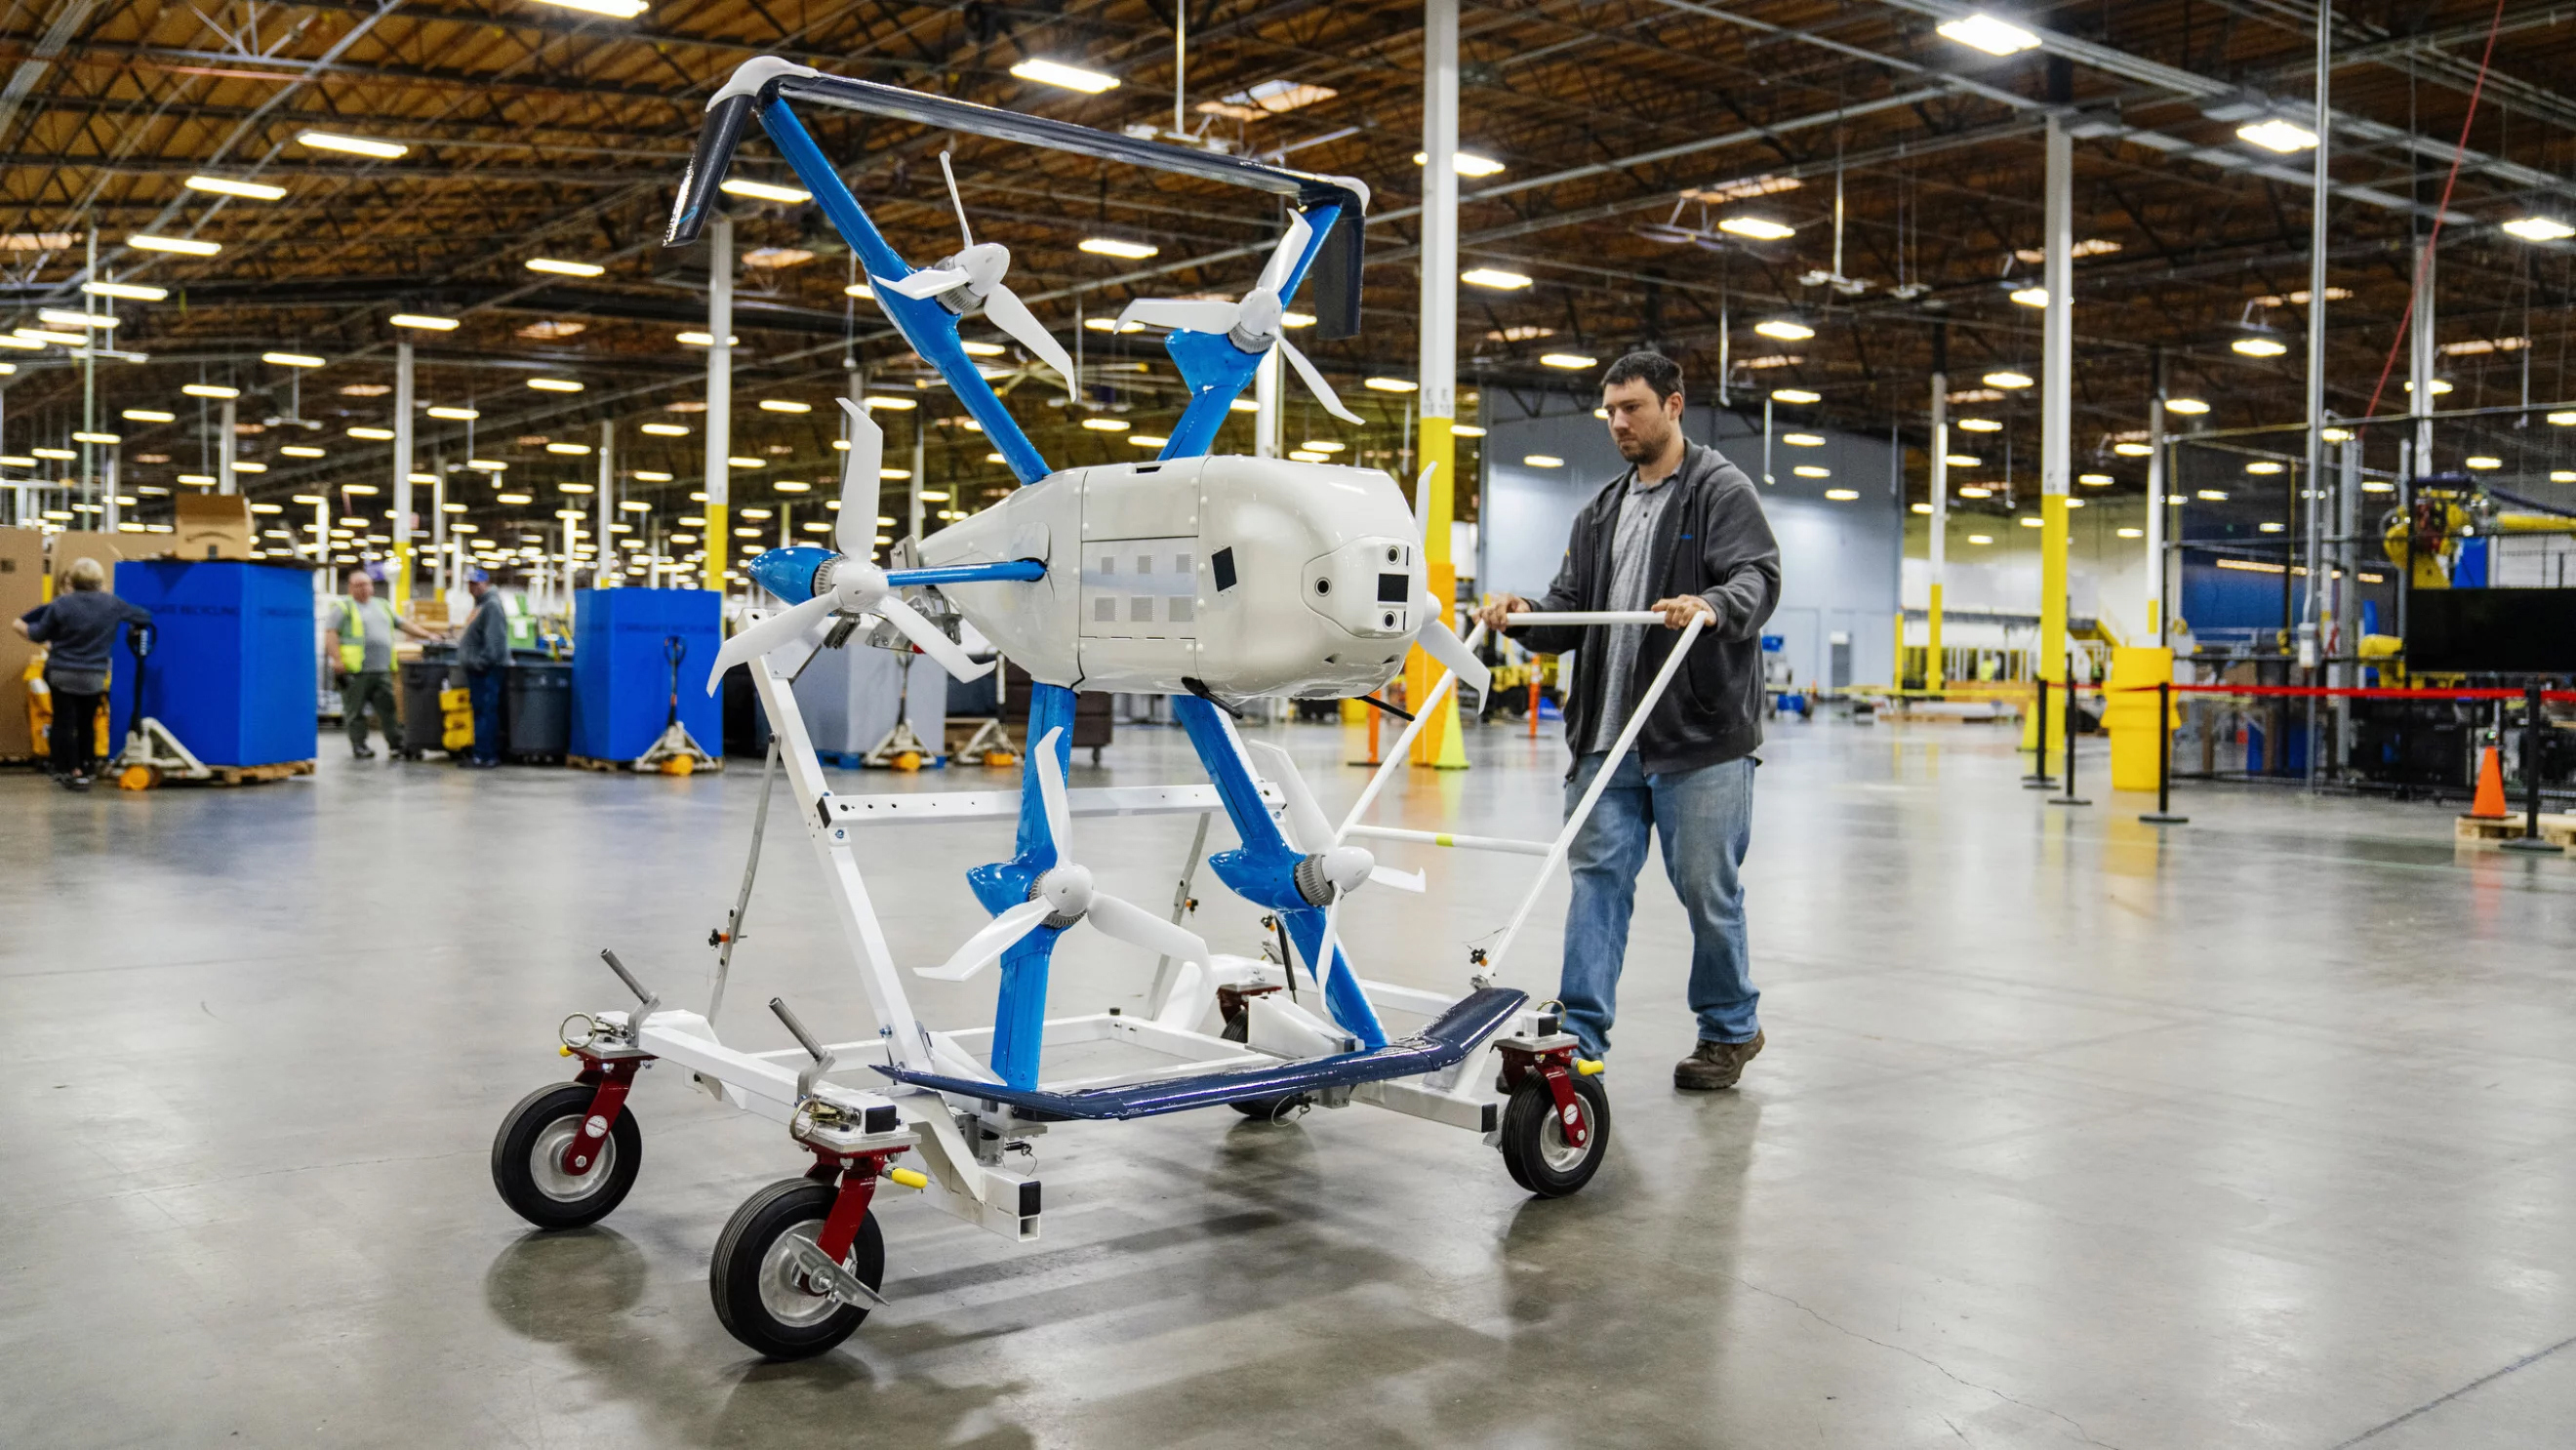 An Amazon worker with one of the new Prime Air drones on a cart in a warehouse